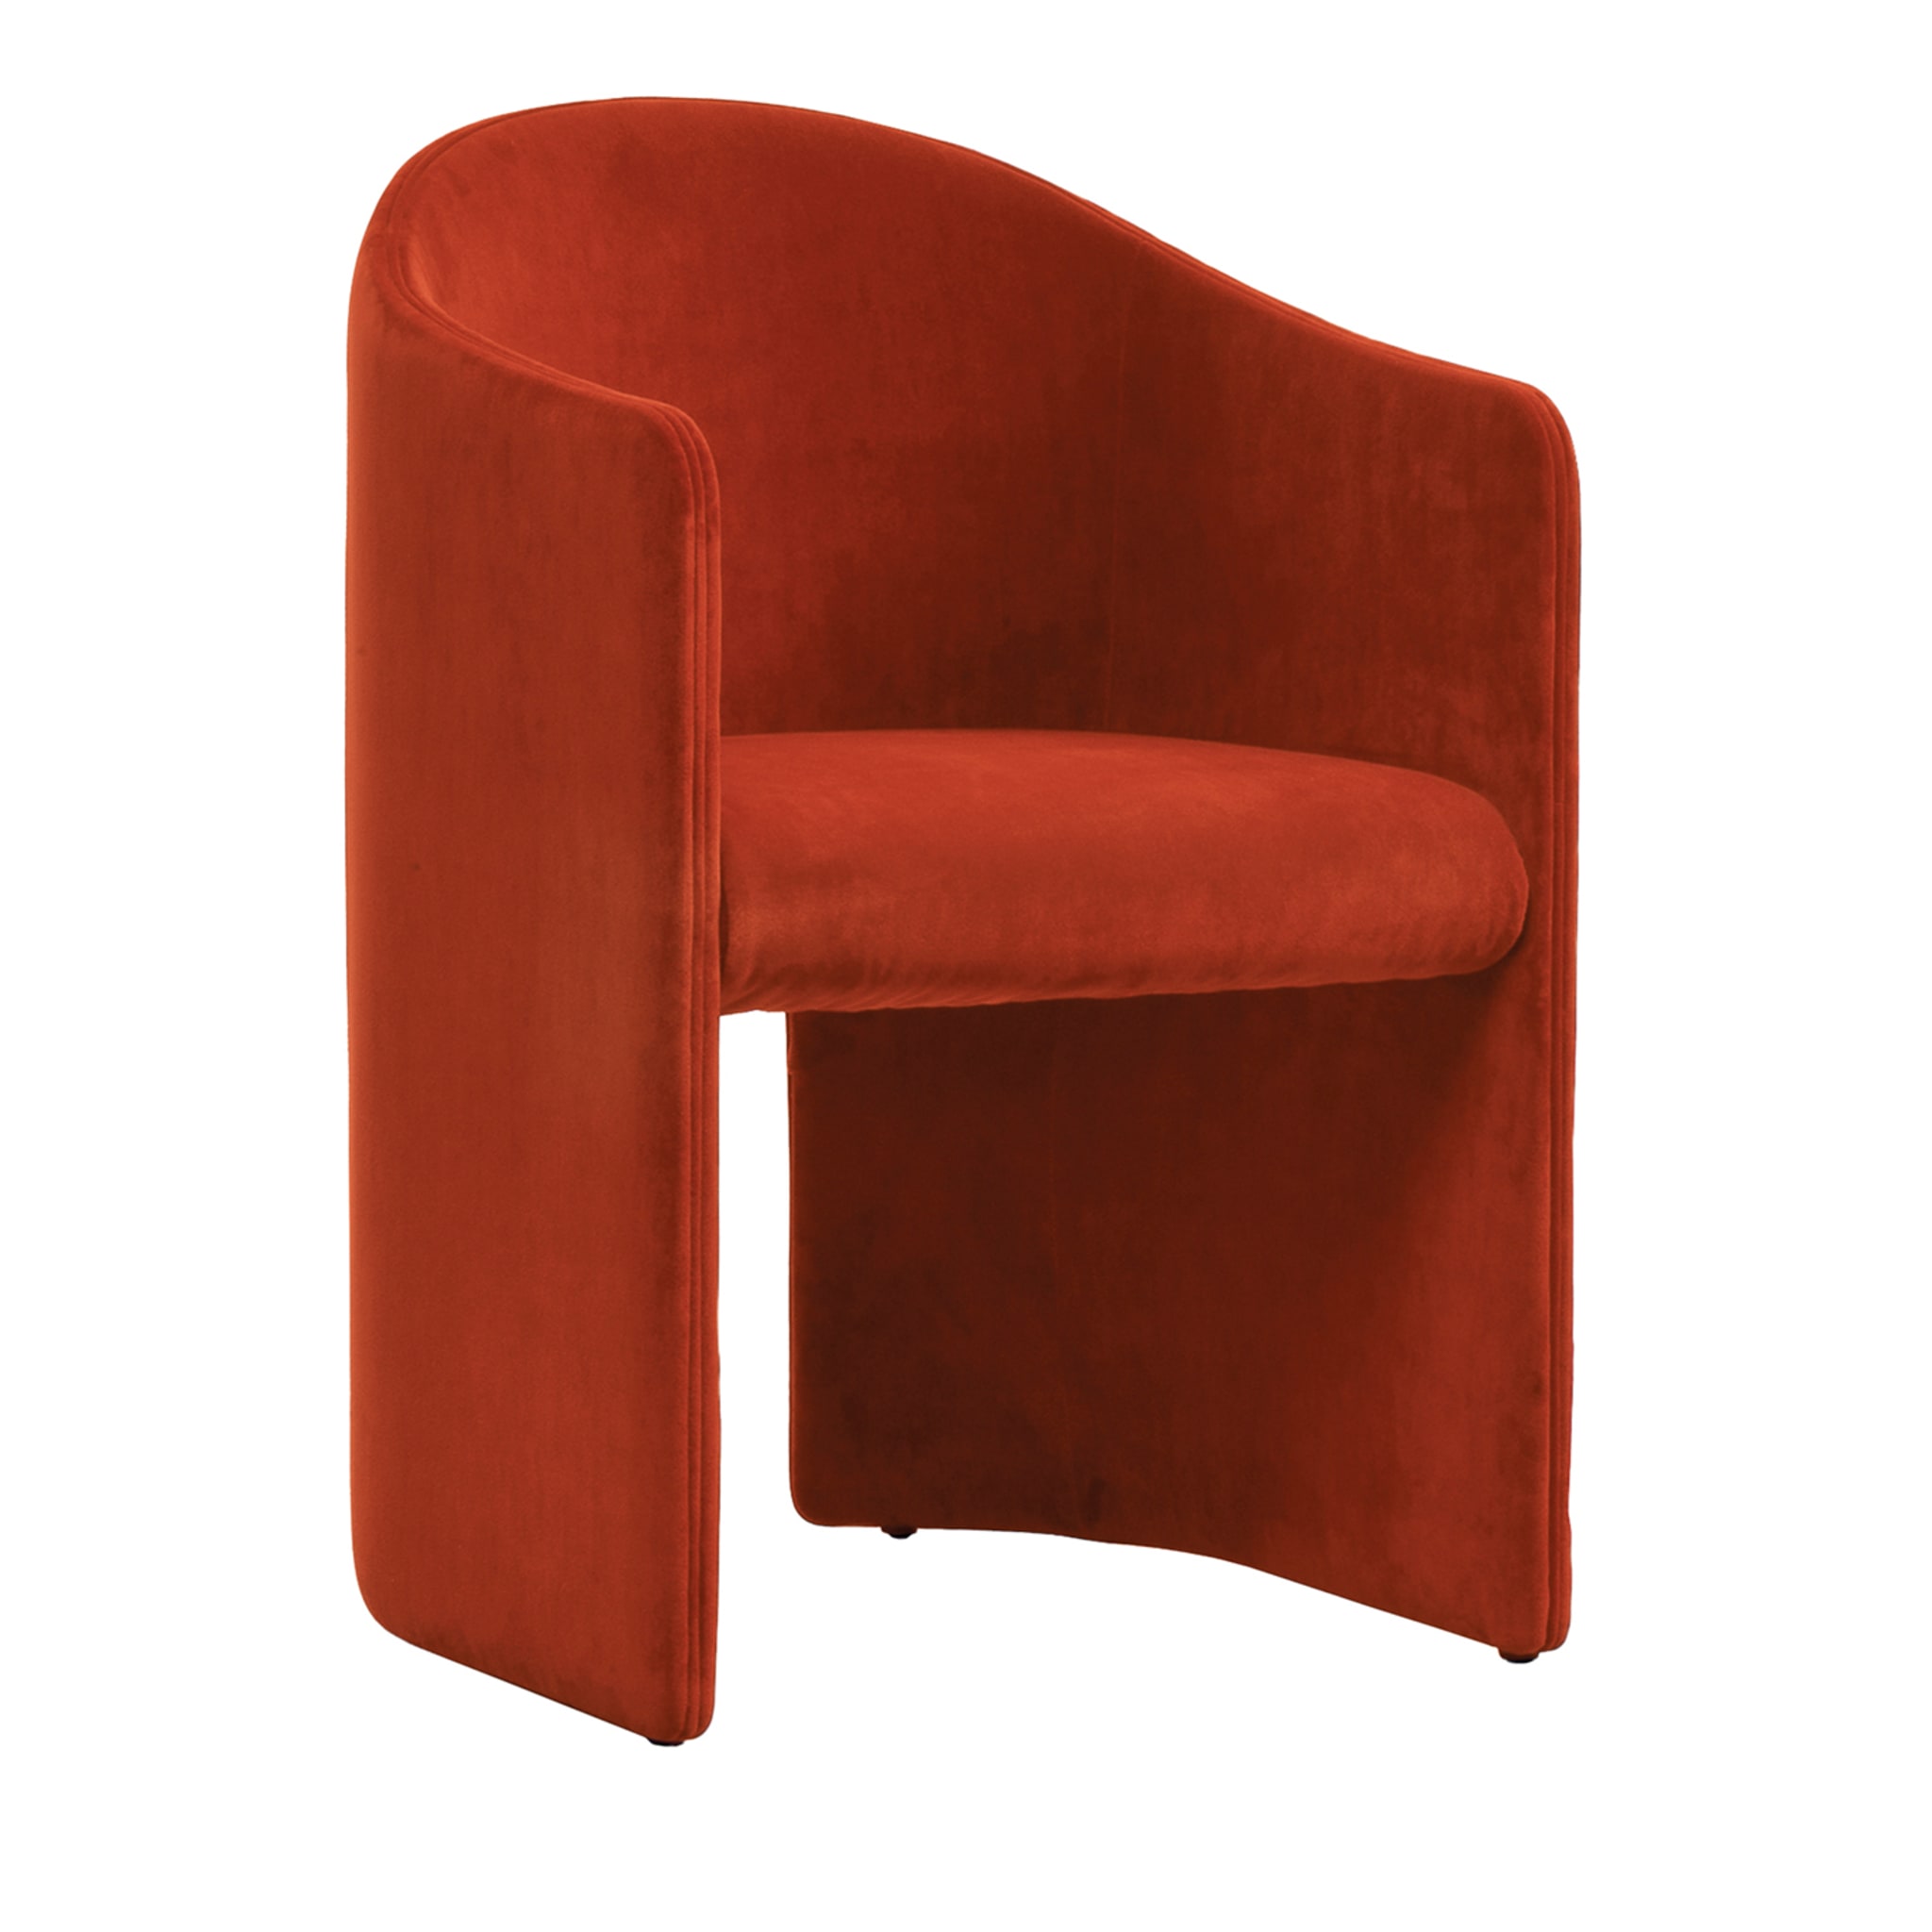 Brera Red Chair by Dainelli Studio  - Main view